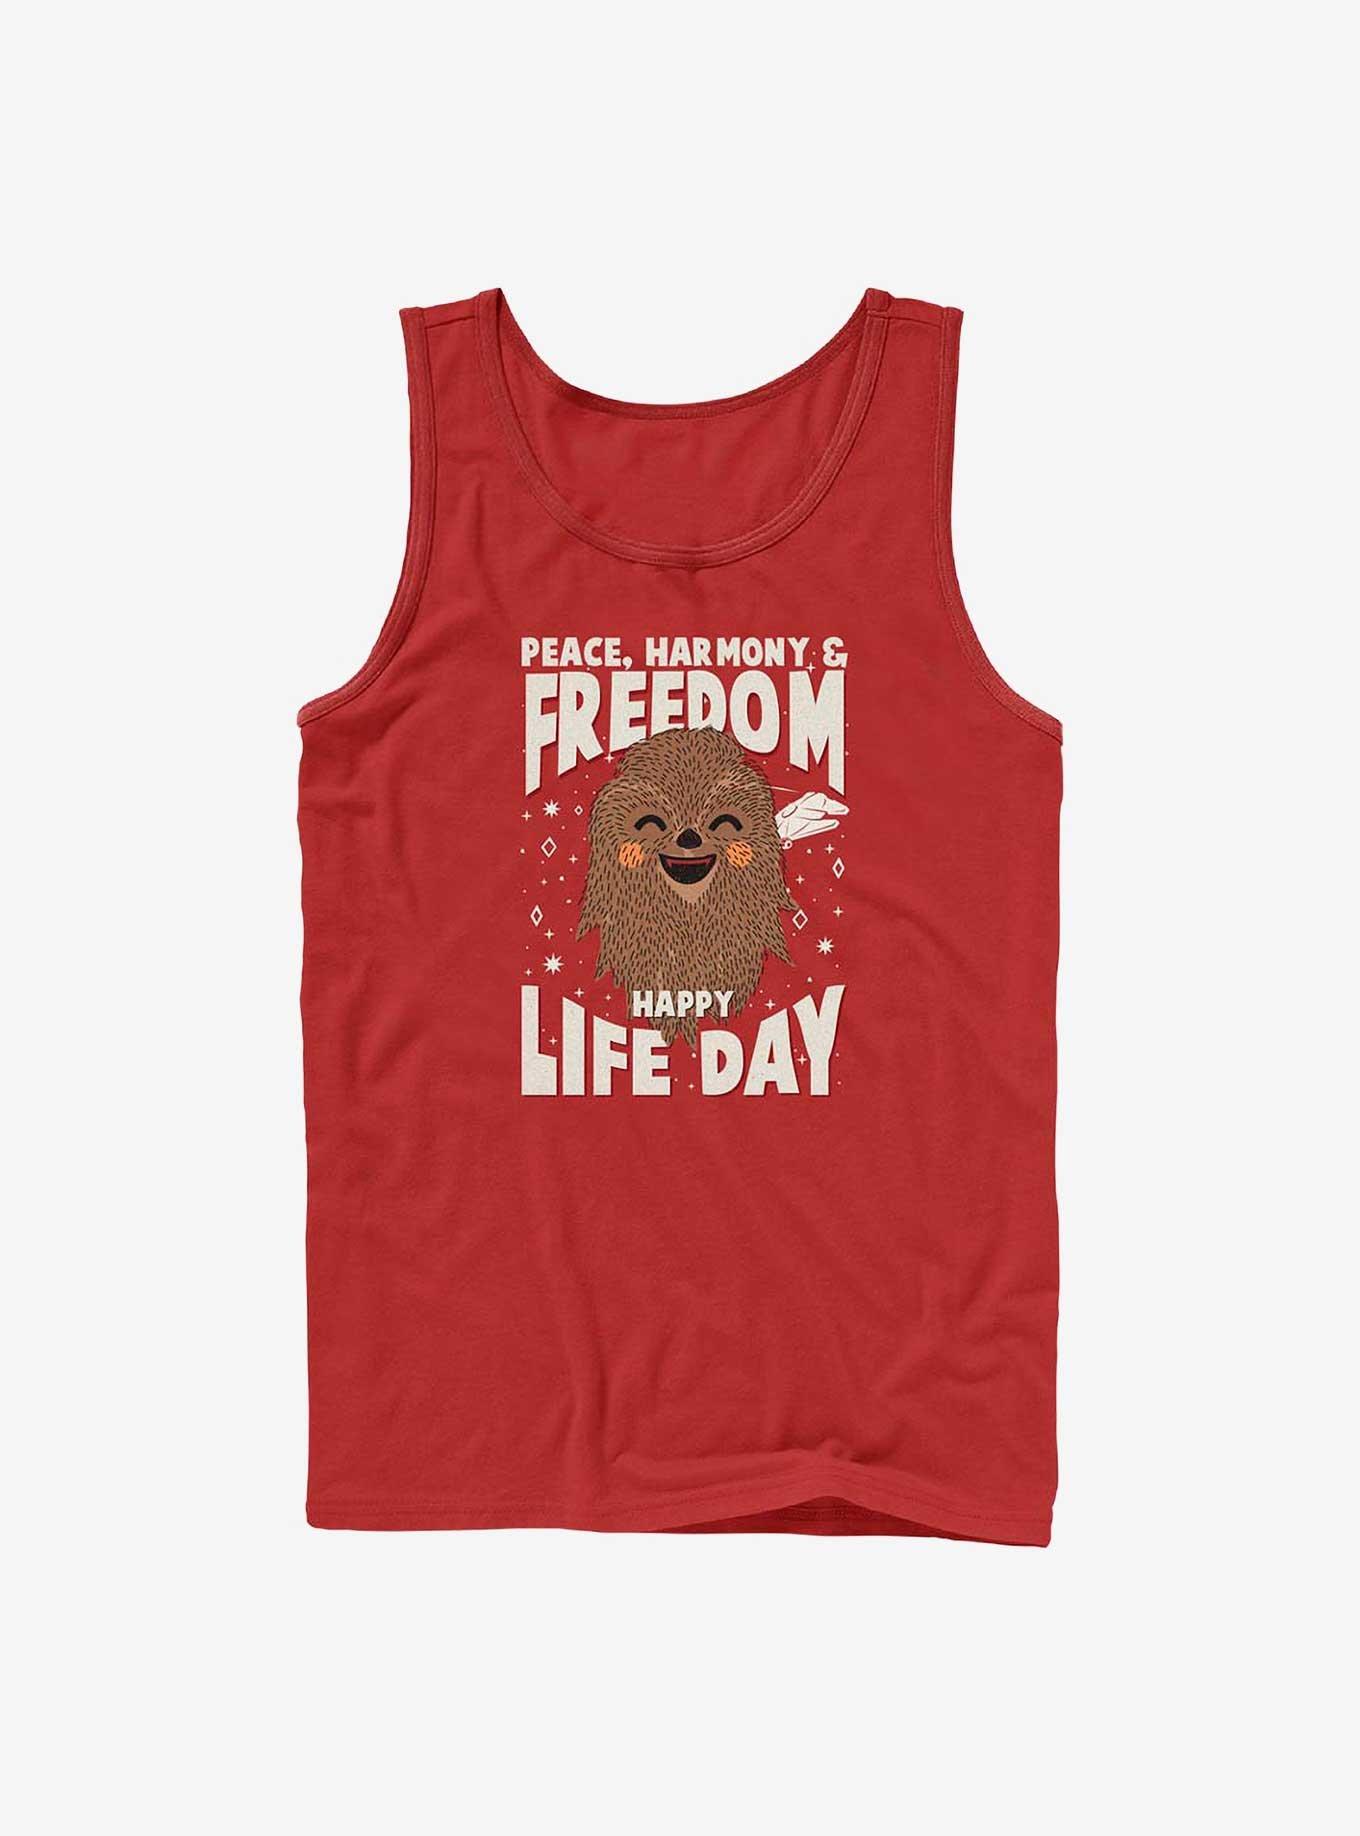 Star Wars Chewie Happy Life Day T-Shirt, RED, hi-res